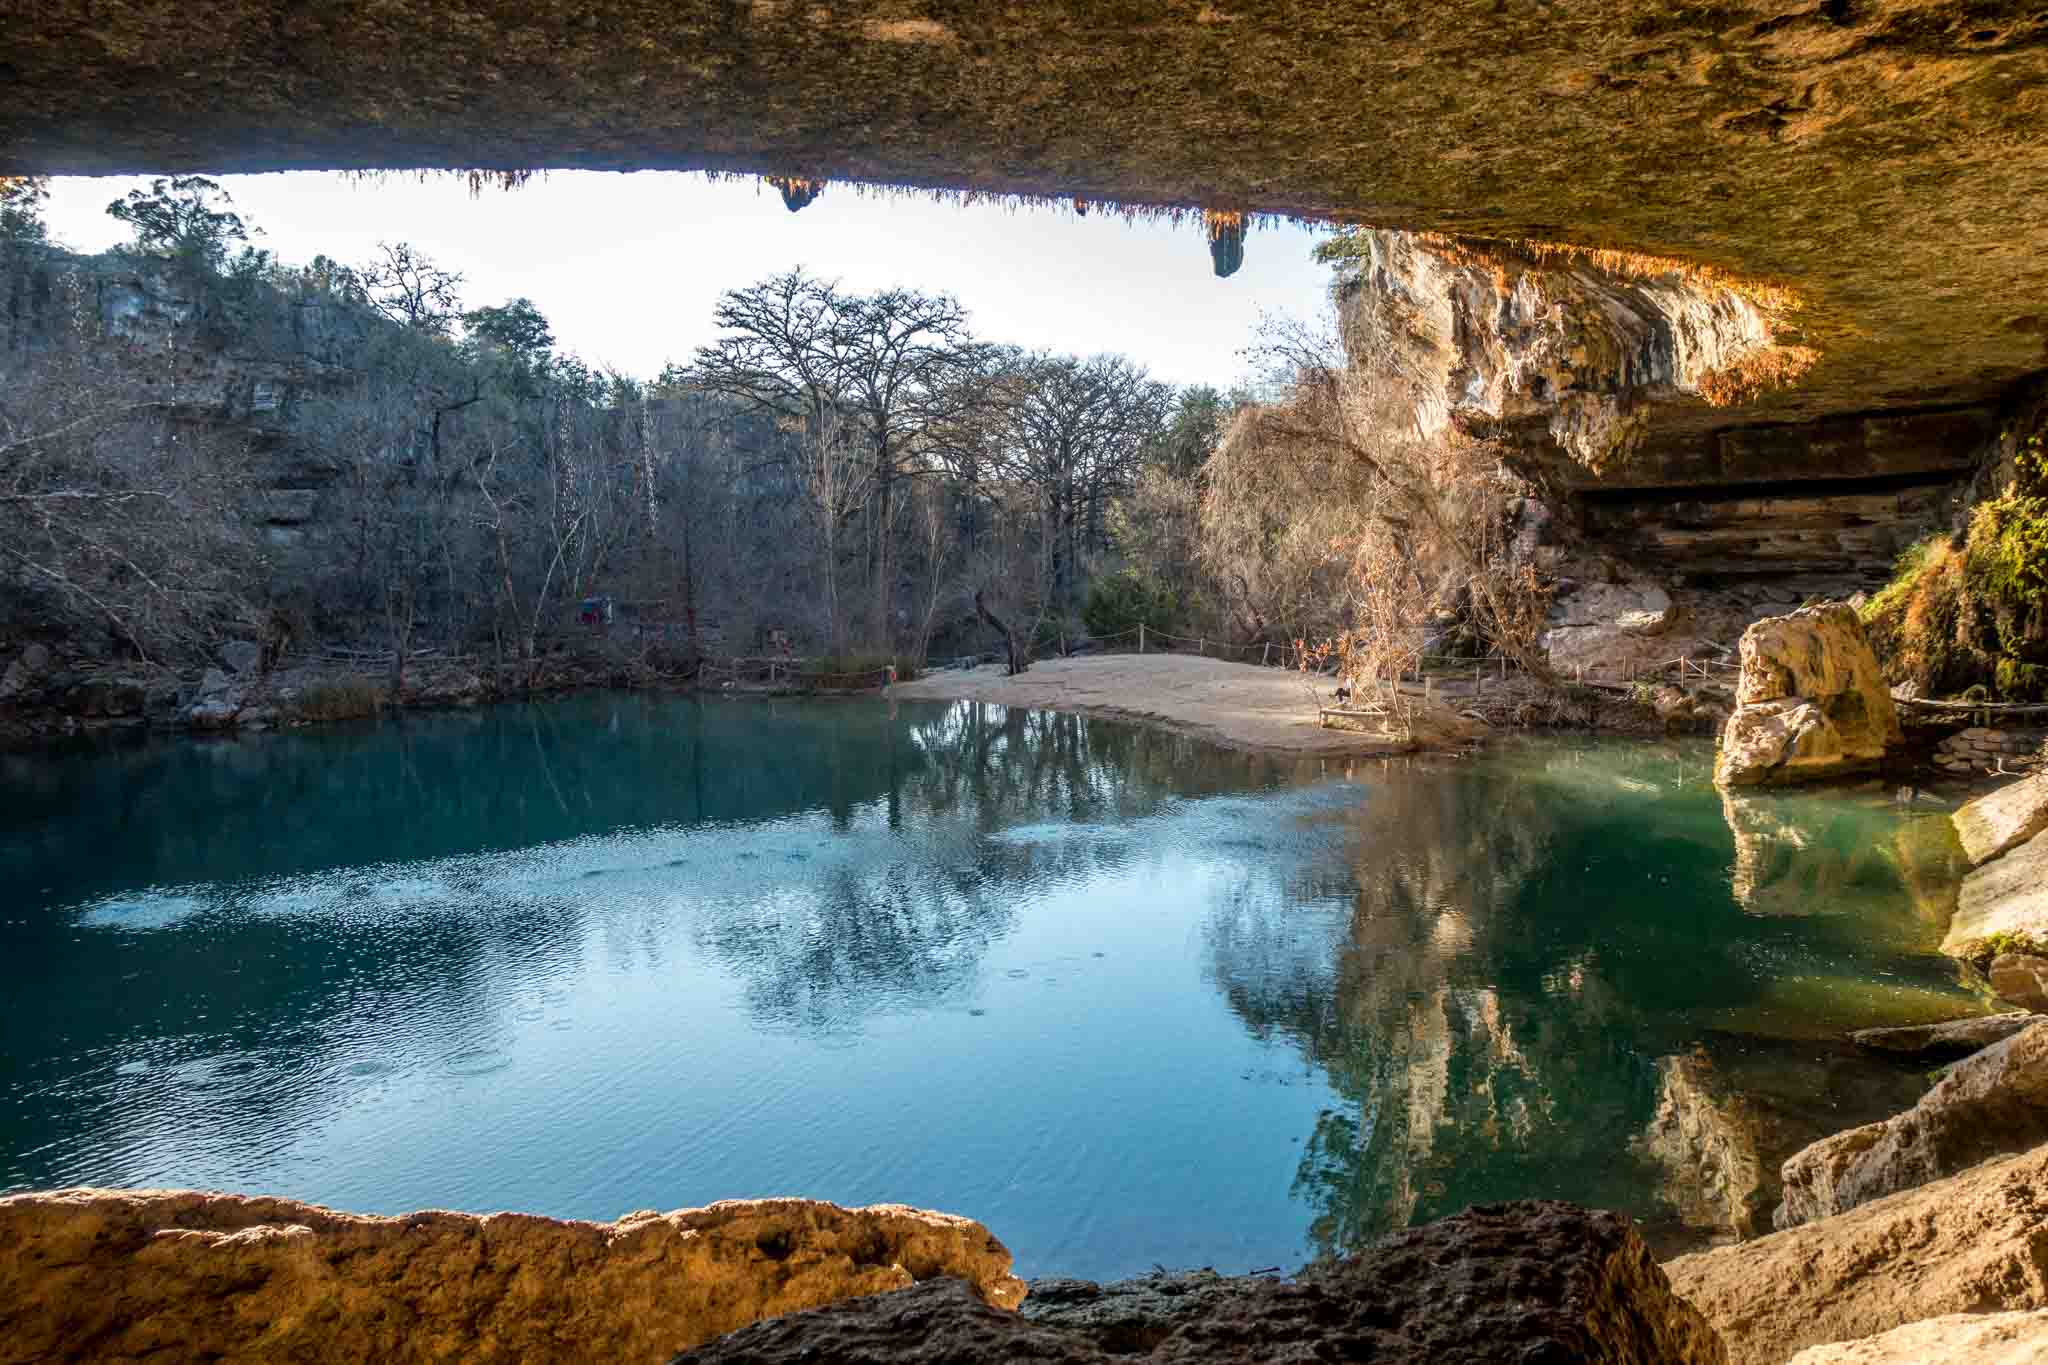 Hamilton Pool, a swimming hole surrounded by trees and a limestone wall.